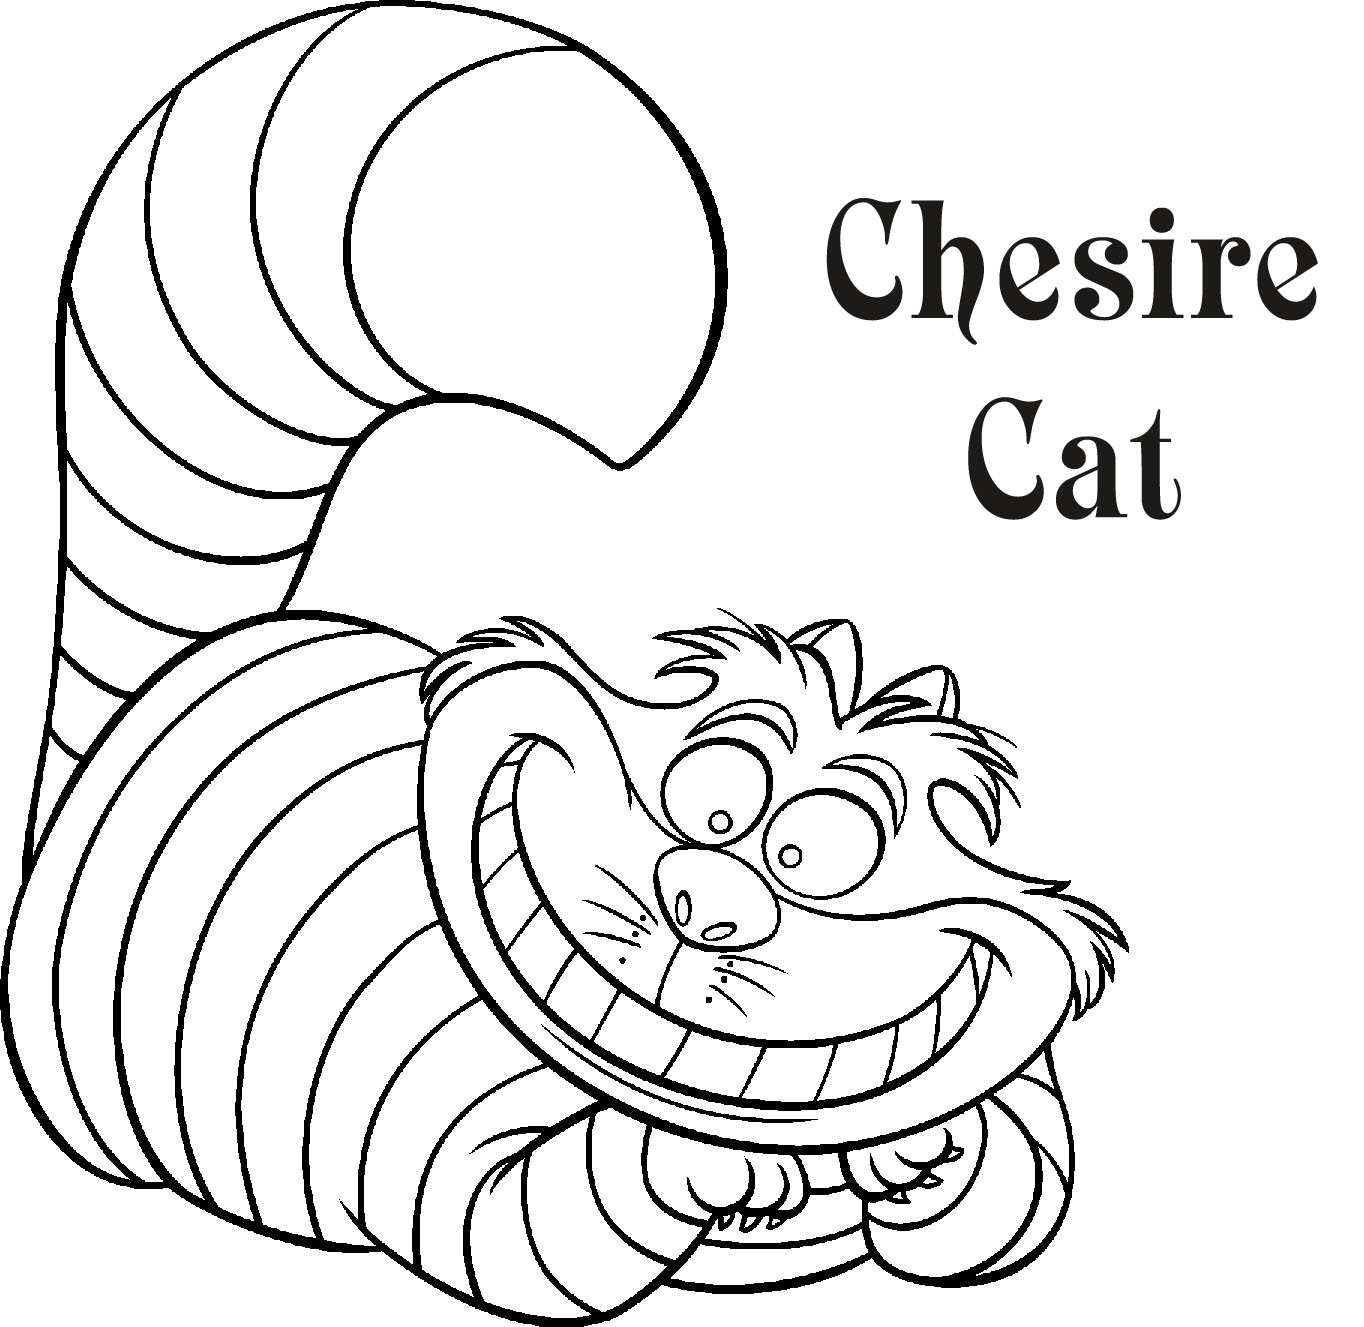 Cheshire Cat Coloring Pages
 Cheshire Cat Coloring Pages Coloring Home